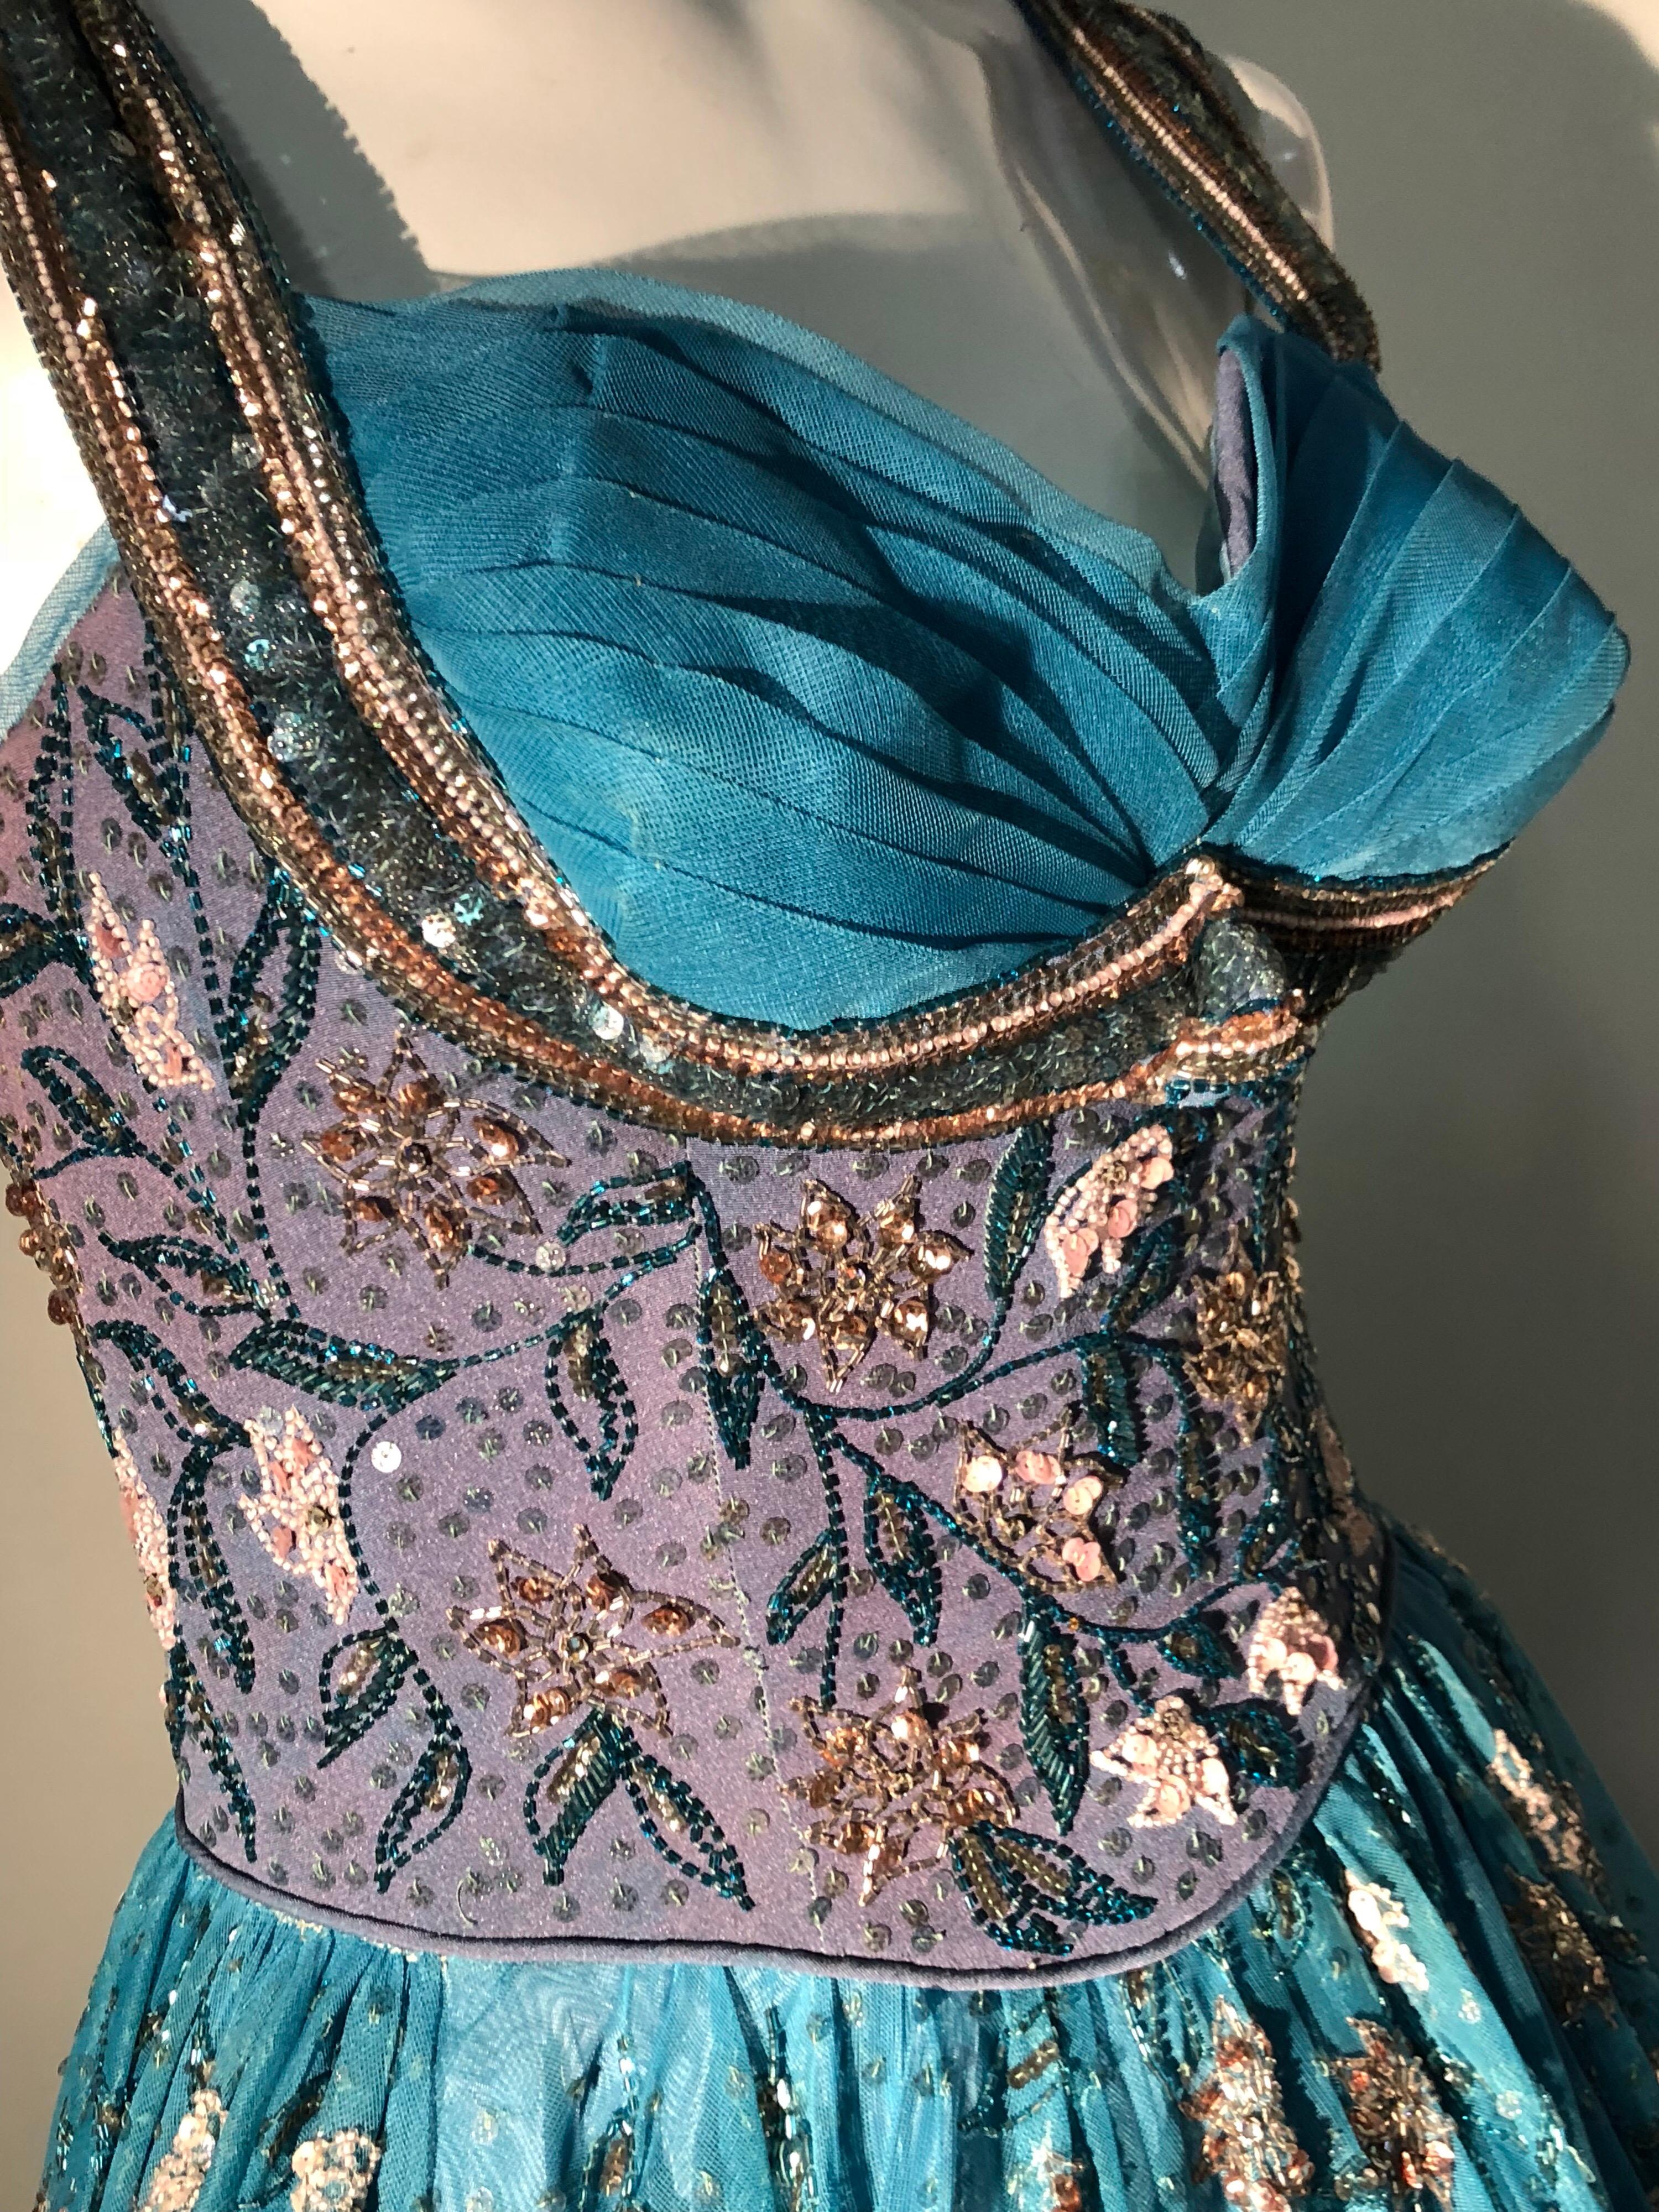 1950s MGM Mme. Etoile by Irene Sharaff Couture Ball Gown in Deep Teal Silk For Sale 4